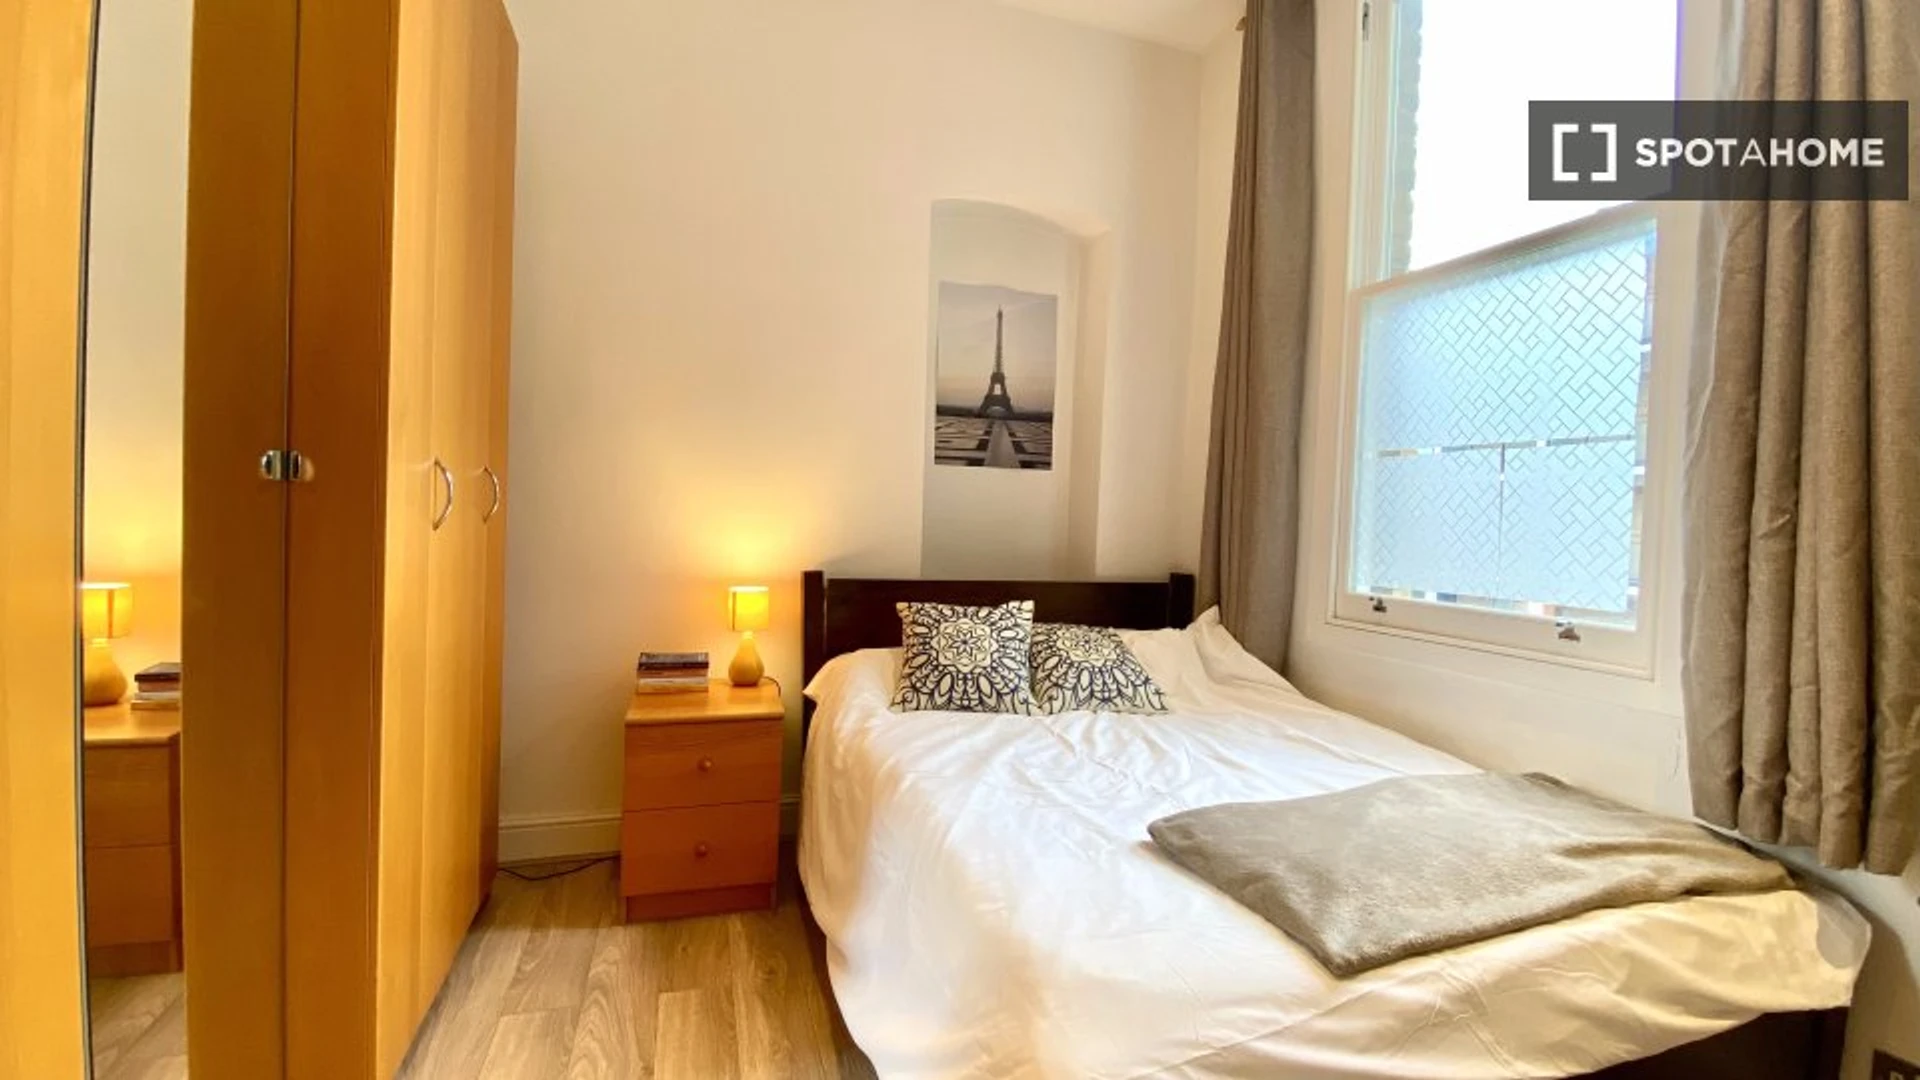 Accommodation in the centre of London